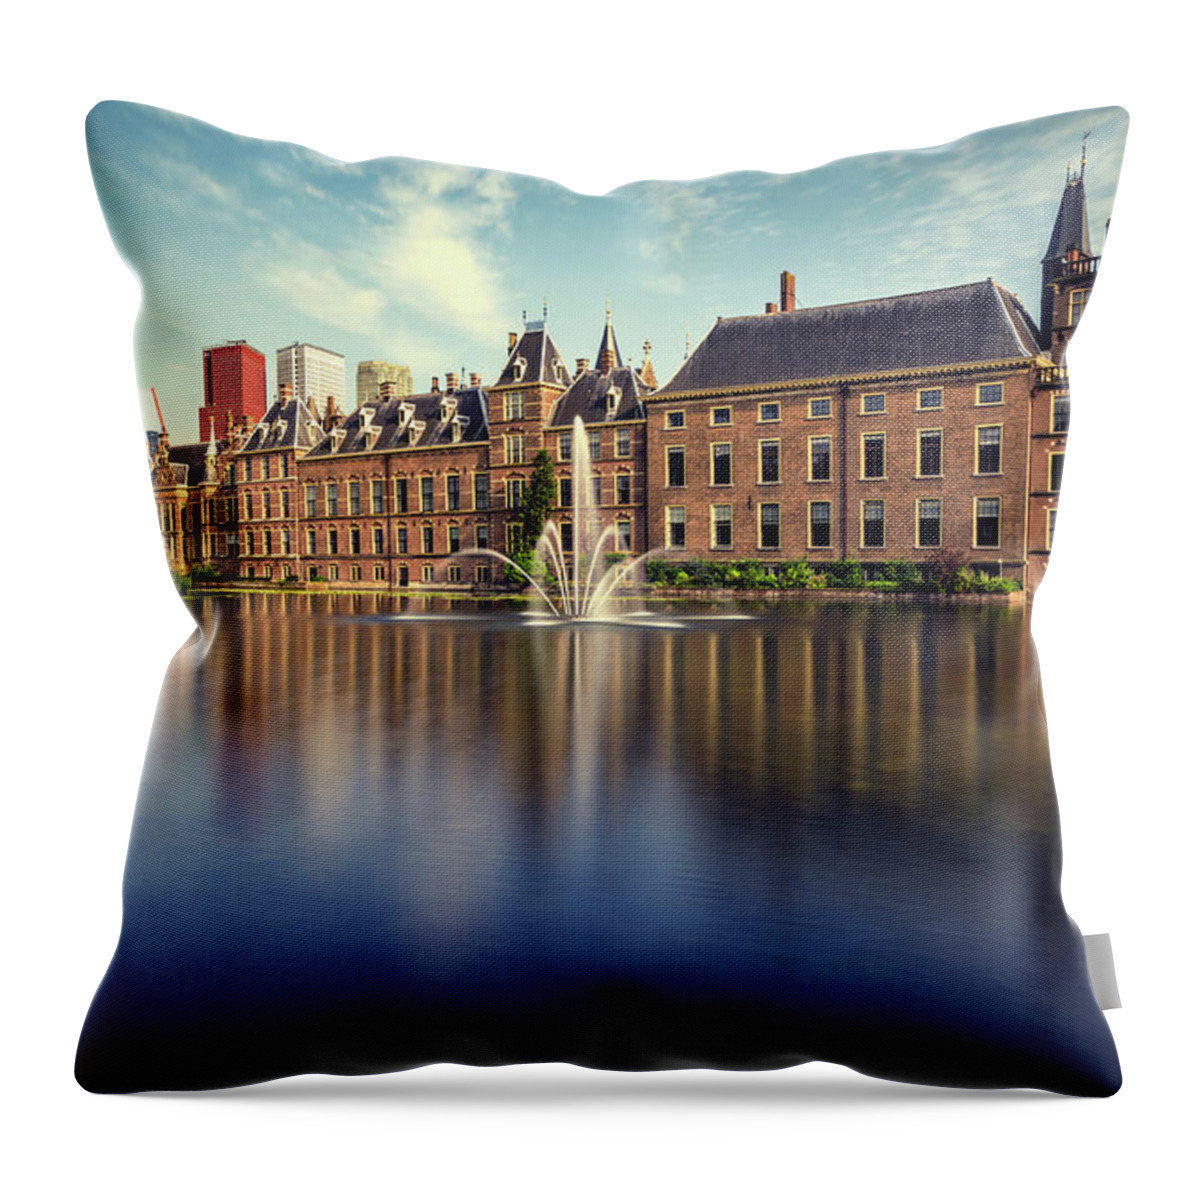 The Hague Throw Pillow featuring the photograph Binnenhof, The Hague by Pablo Lopez